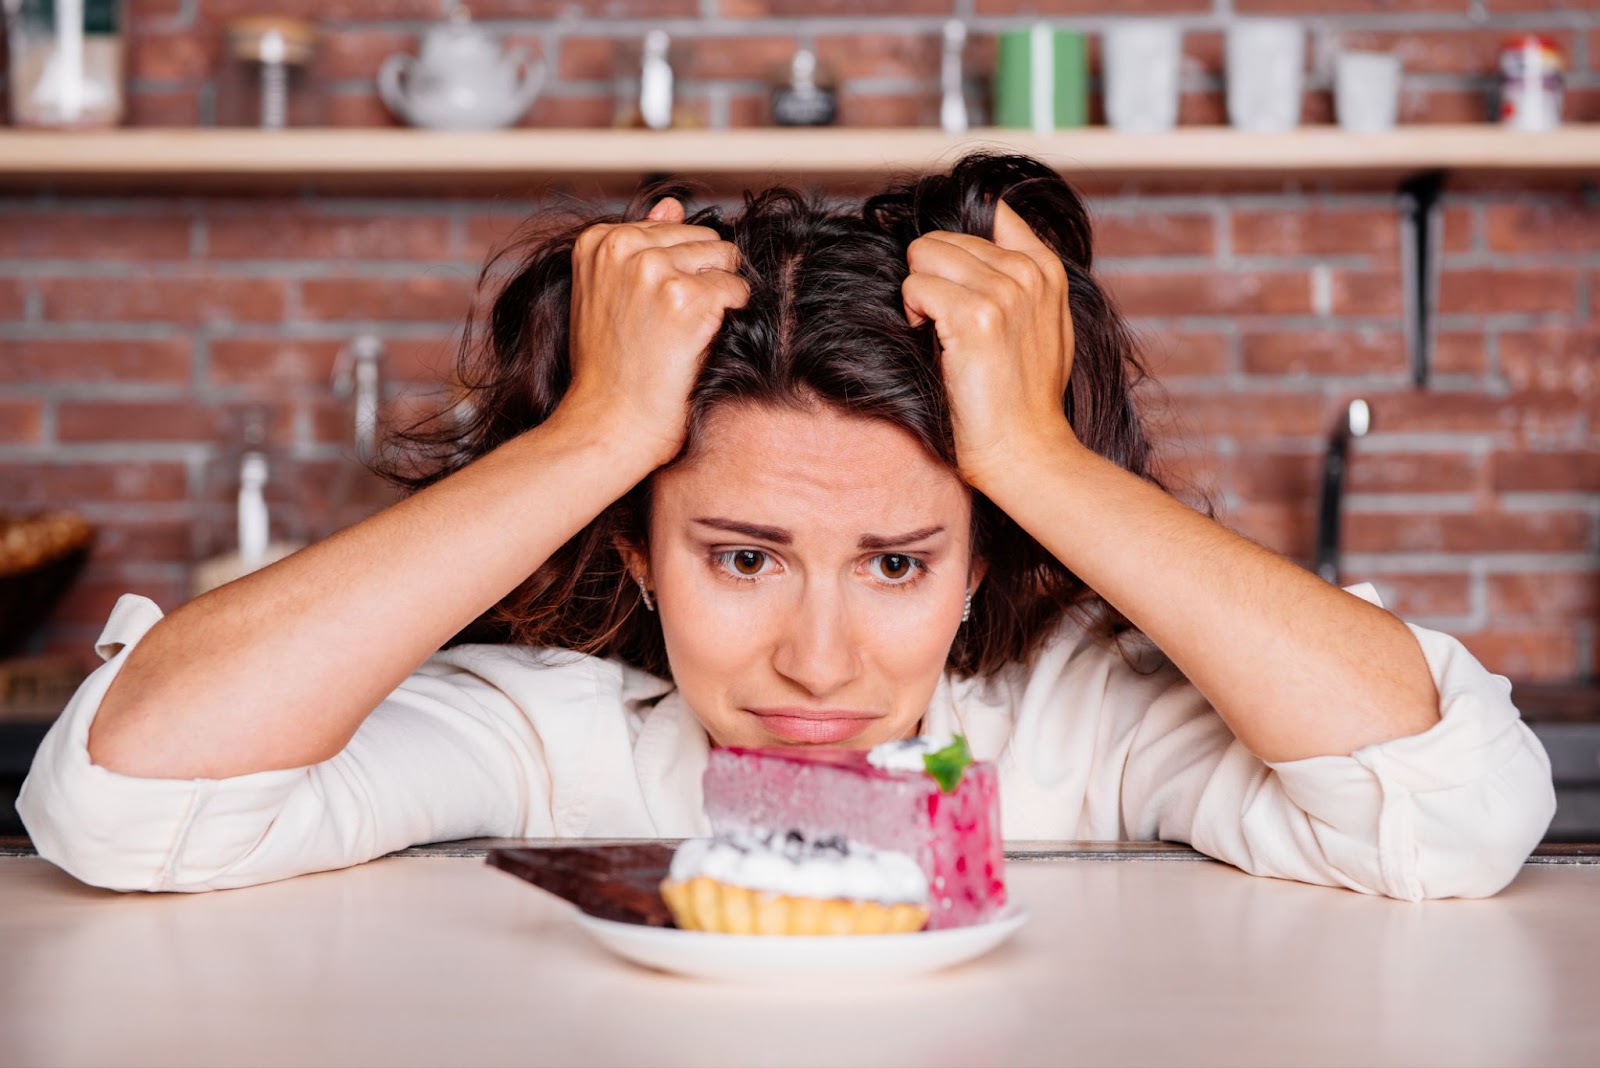 A woman indulges in a slice of cake while practicing mindful eating and choosing healthy meals and snacks